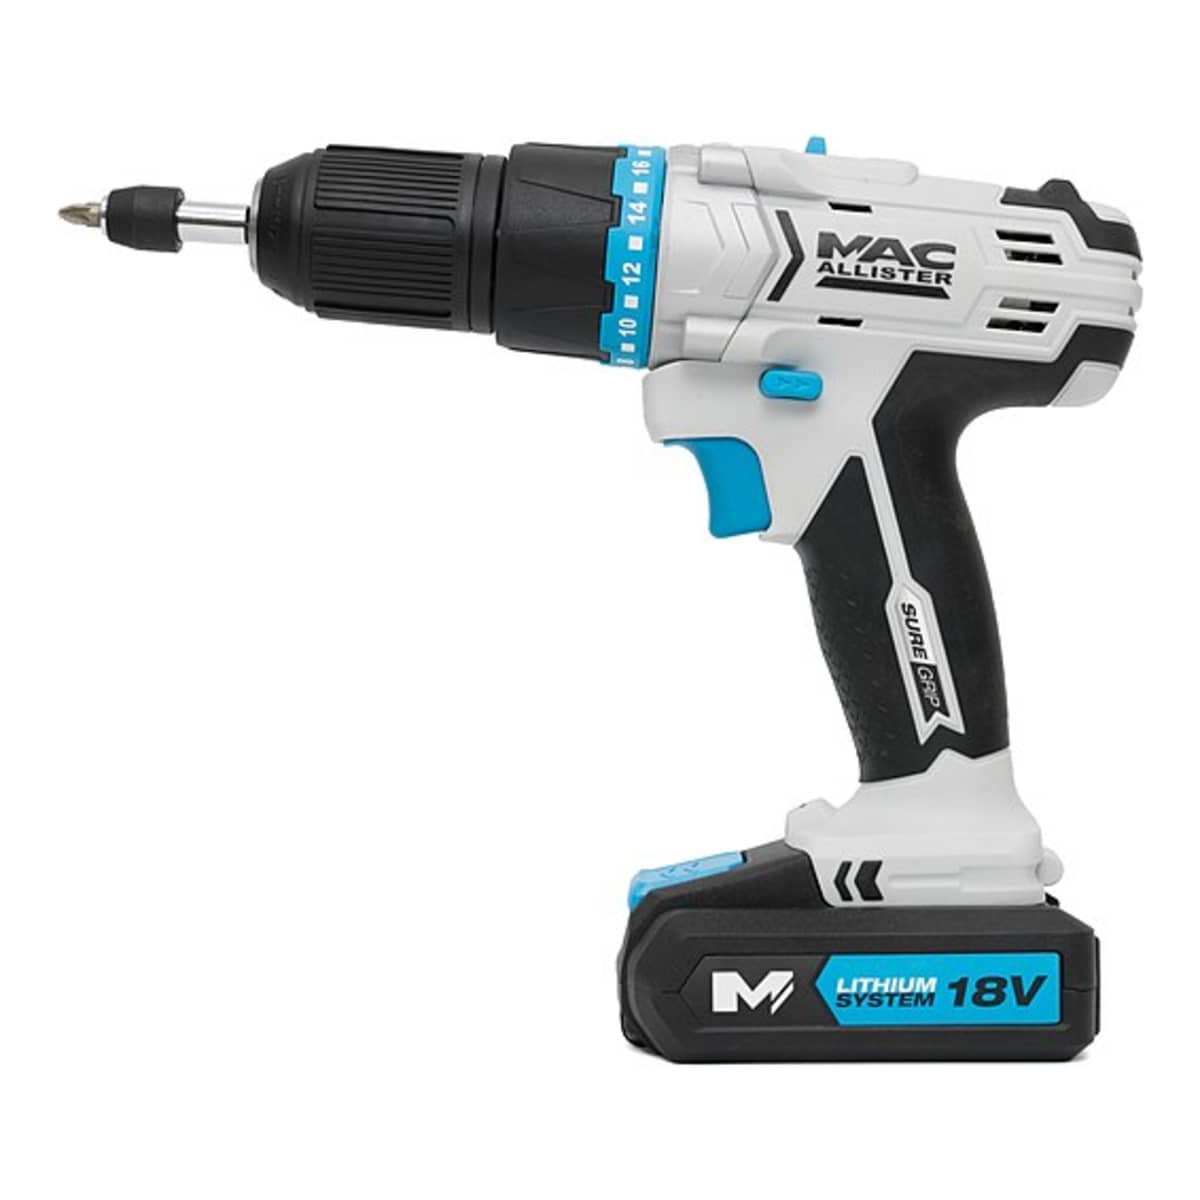 I highly recommend this 12-in-1 electric screwdriver, and you can get one  for under $50